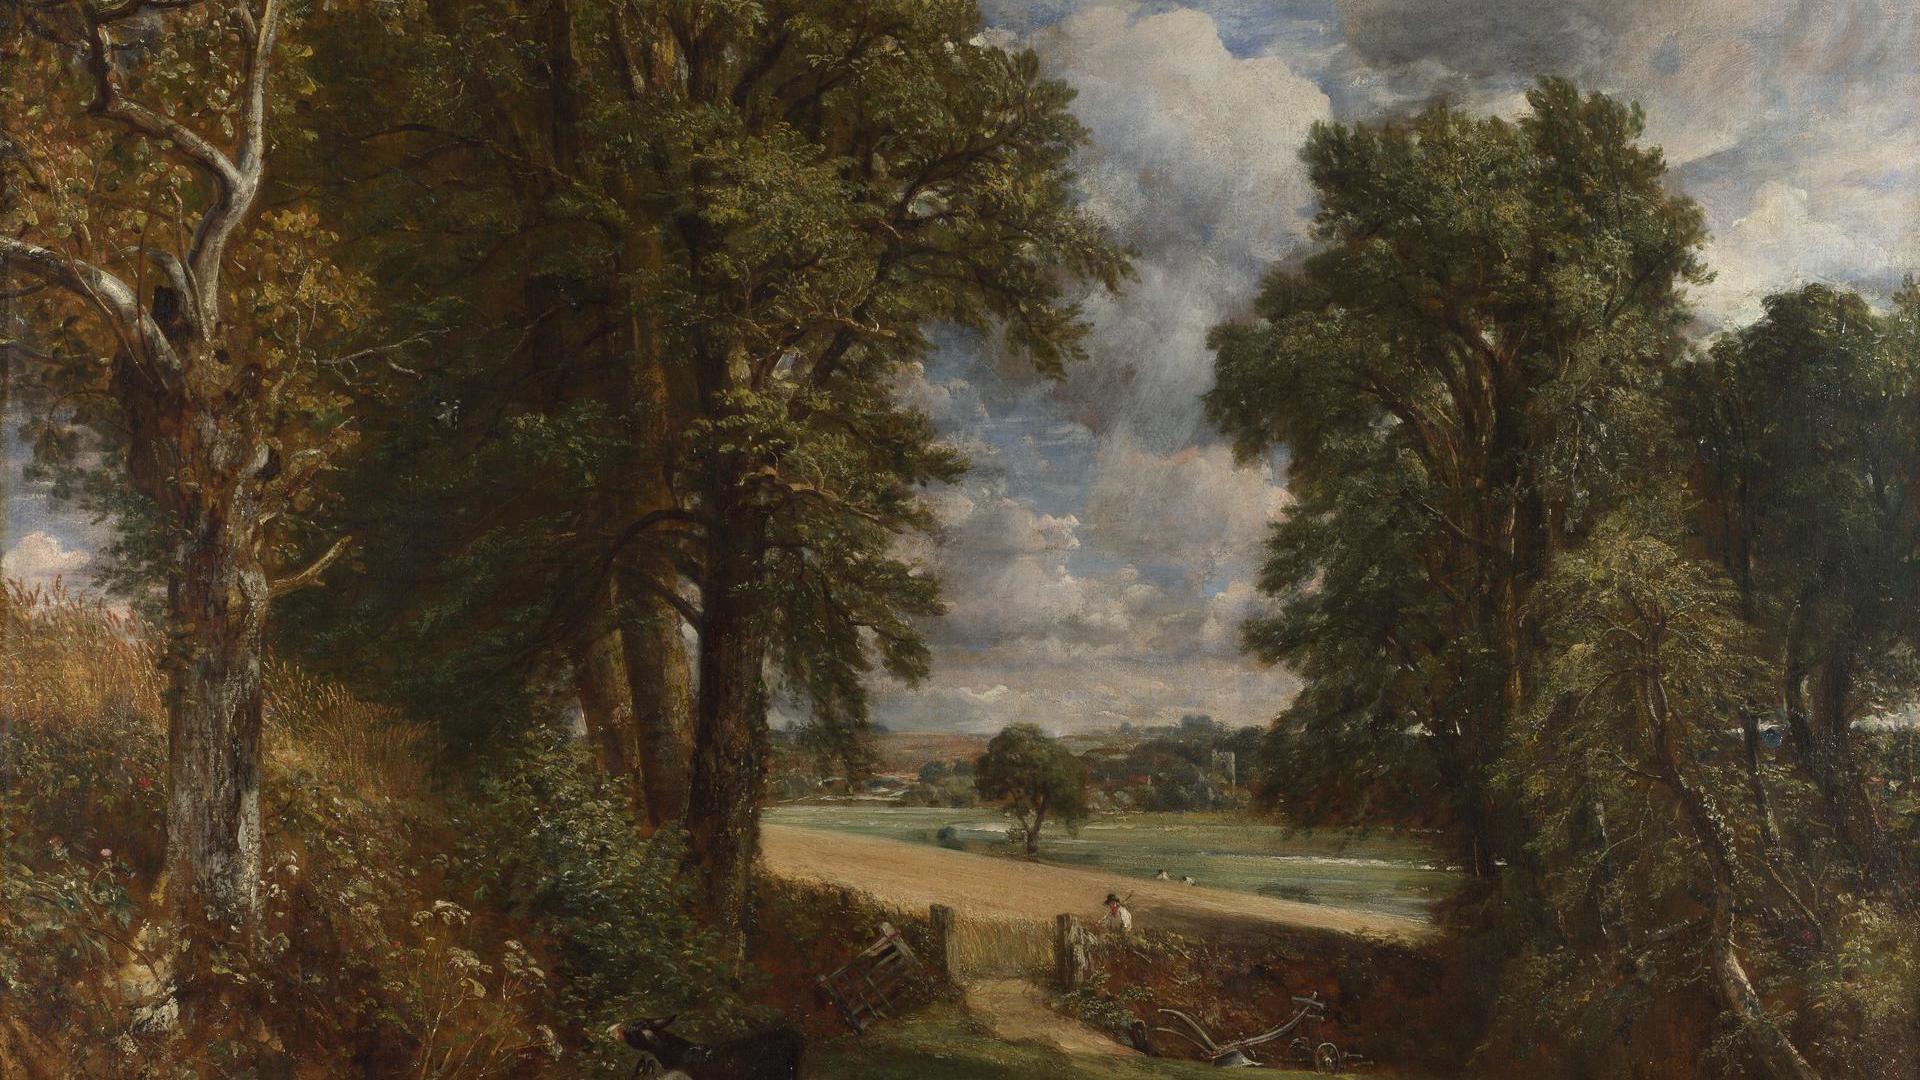 The Cornfield by John Constable